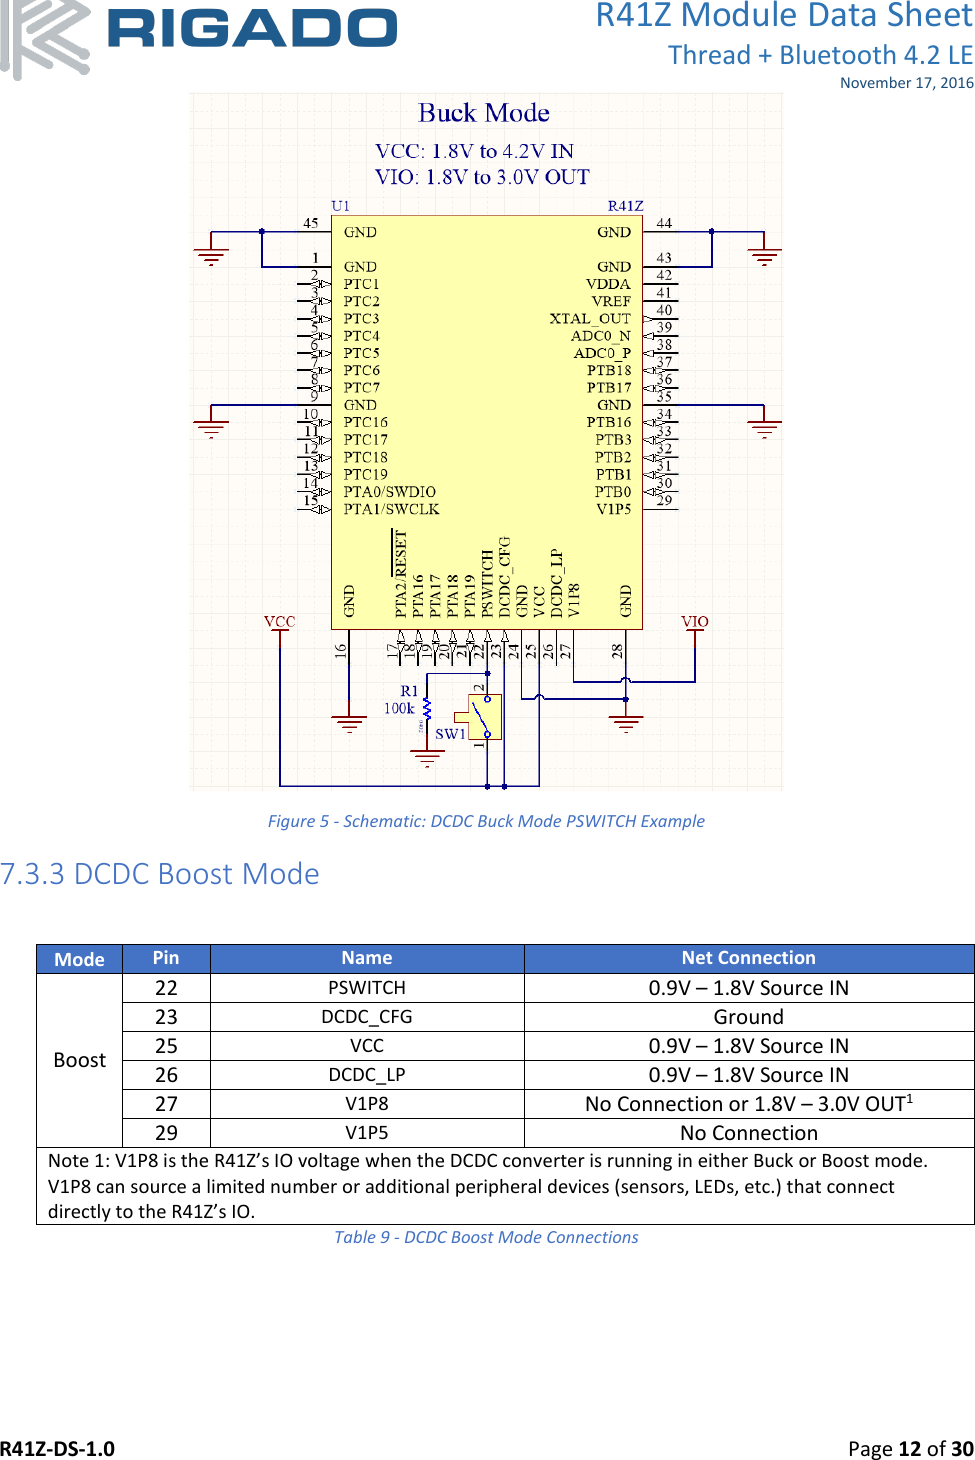 R41Z Module Data Sheet Thread + Bluetooth 4.2 LE November 17, 2016 R41Z-DS-1.0    Page 12 of 30   Figure 5 - Schematic: DCDC Buck Mode PSWITCH Example 7.3.3 DCDC Boost Mode  Mode Pin Name Net Connection Boost 22 PSWITCH 0.9V – 1.8V Source IN 23 DCDC_CFG Ground 25 VCC 0.9V – 1.8V Source IN 26 DCDC_LP 0.9V – 1.8V Source IN 27 V1P8 No Connection or 1.8V – 3.0V OUT1 29 V1P5 No Connection Note 1: V1P8 is the R41Z’s IO voltage when the DCDC converter is running in either Buck or Boost mode. V1P8 can source a limited number or additional peripheral devices (sensors, LEDs, etc.) that connect directly to the R41Z’s IO. Table 9 - DCDC Boost Mode Connections 